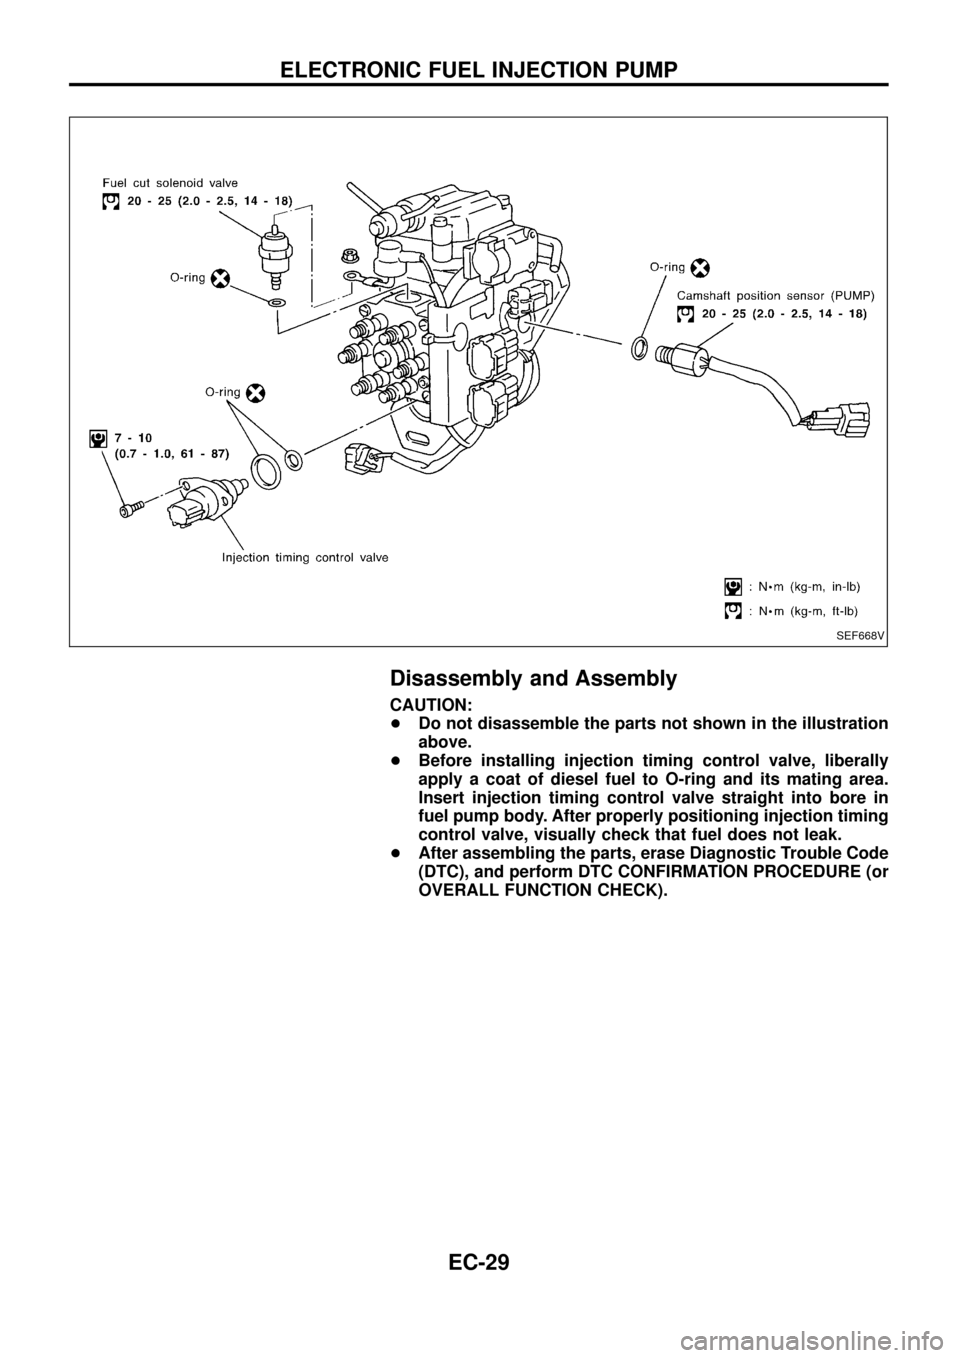 NISSAN PATROL 1998 Y61 / 5.G Engine Control Owners Guide Disassembly and Assembly
CAUTION:
+Do not disassemble the parts not shown in the illustration
above.
+Before installing injection timing control valve, liberally
apply a coat of diesel fuel to O-ring 